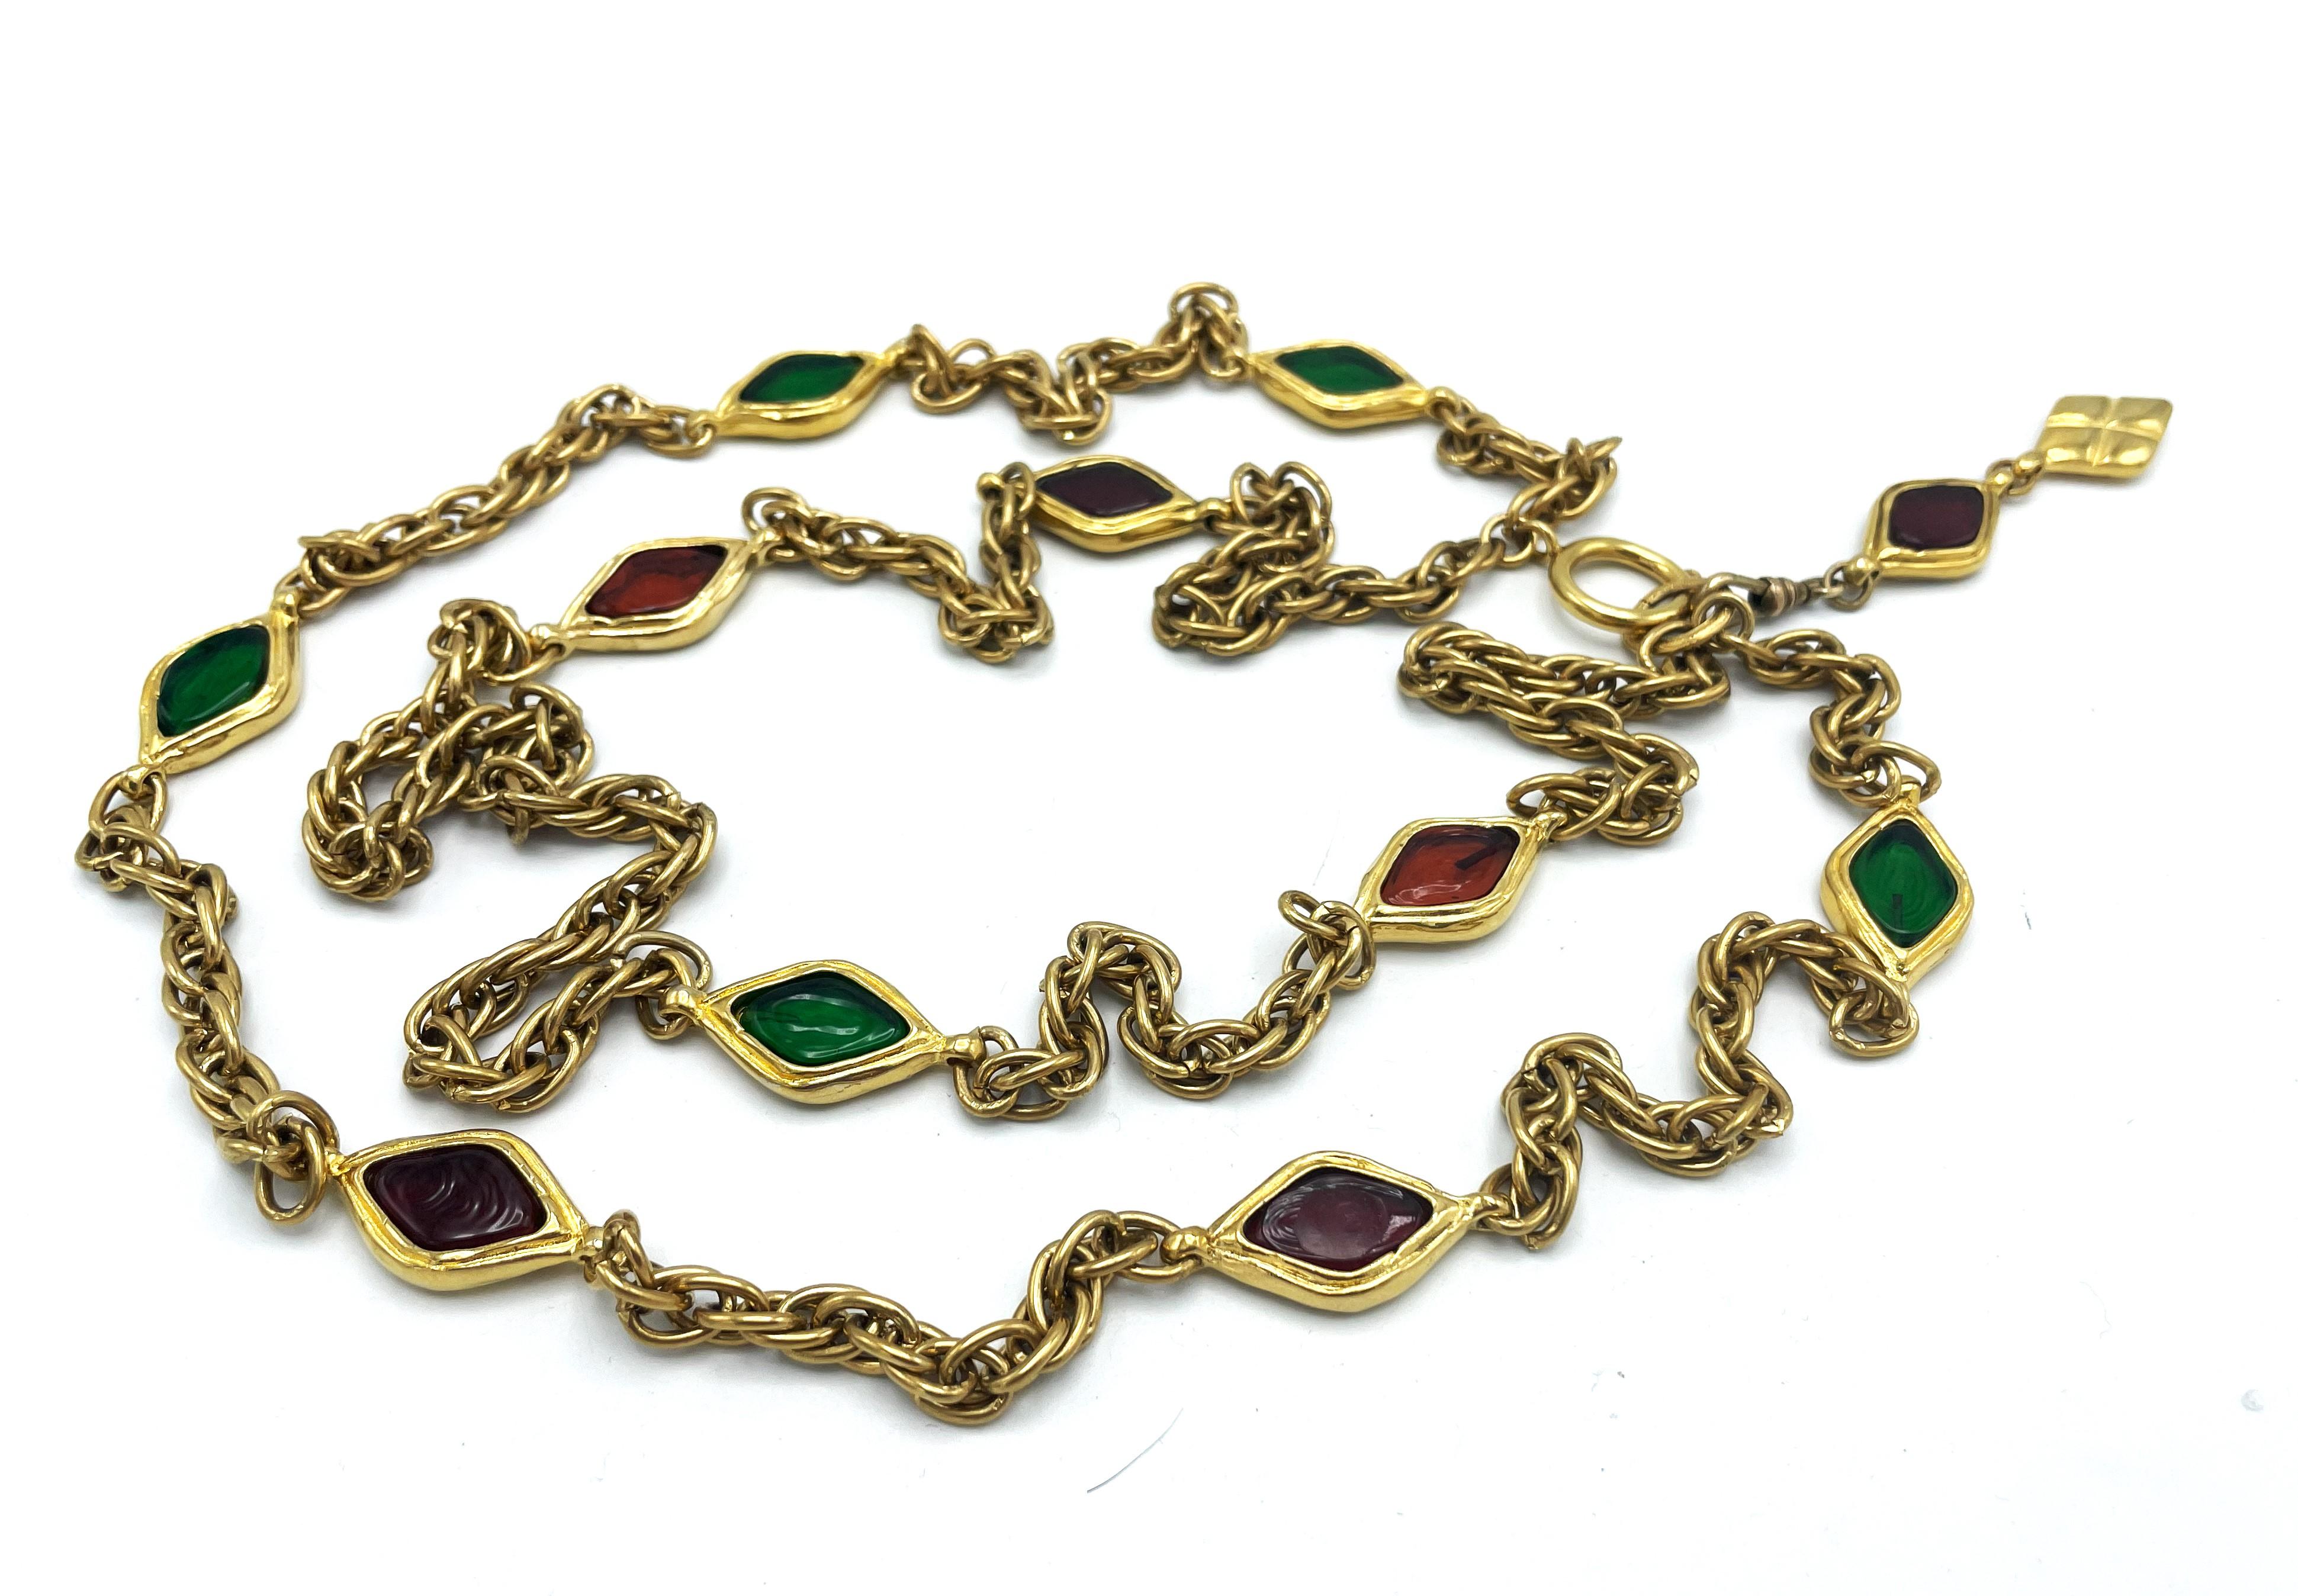  2 row Chanel necklace with red and green pate the verre, gold plated, 1970/80's For Sale 8